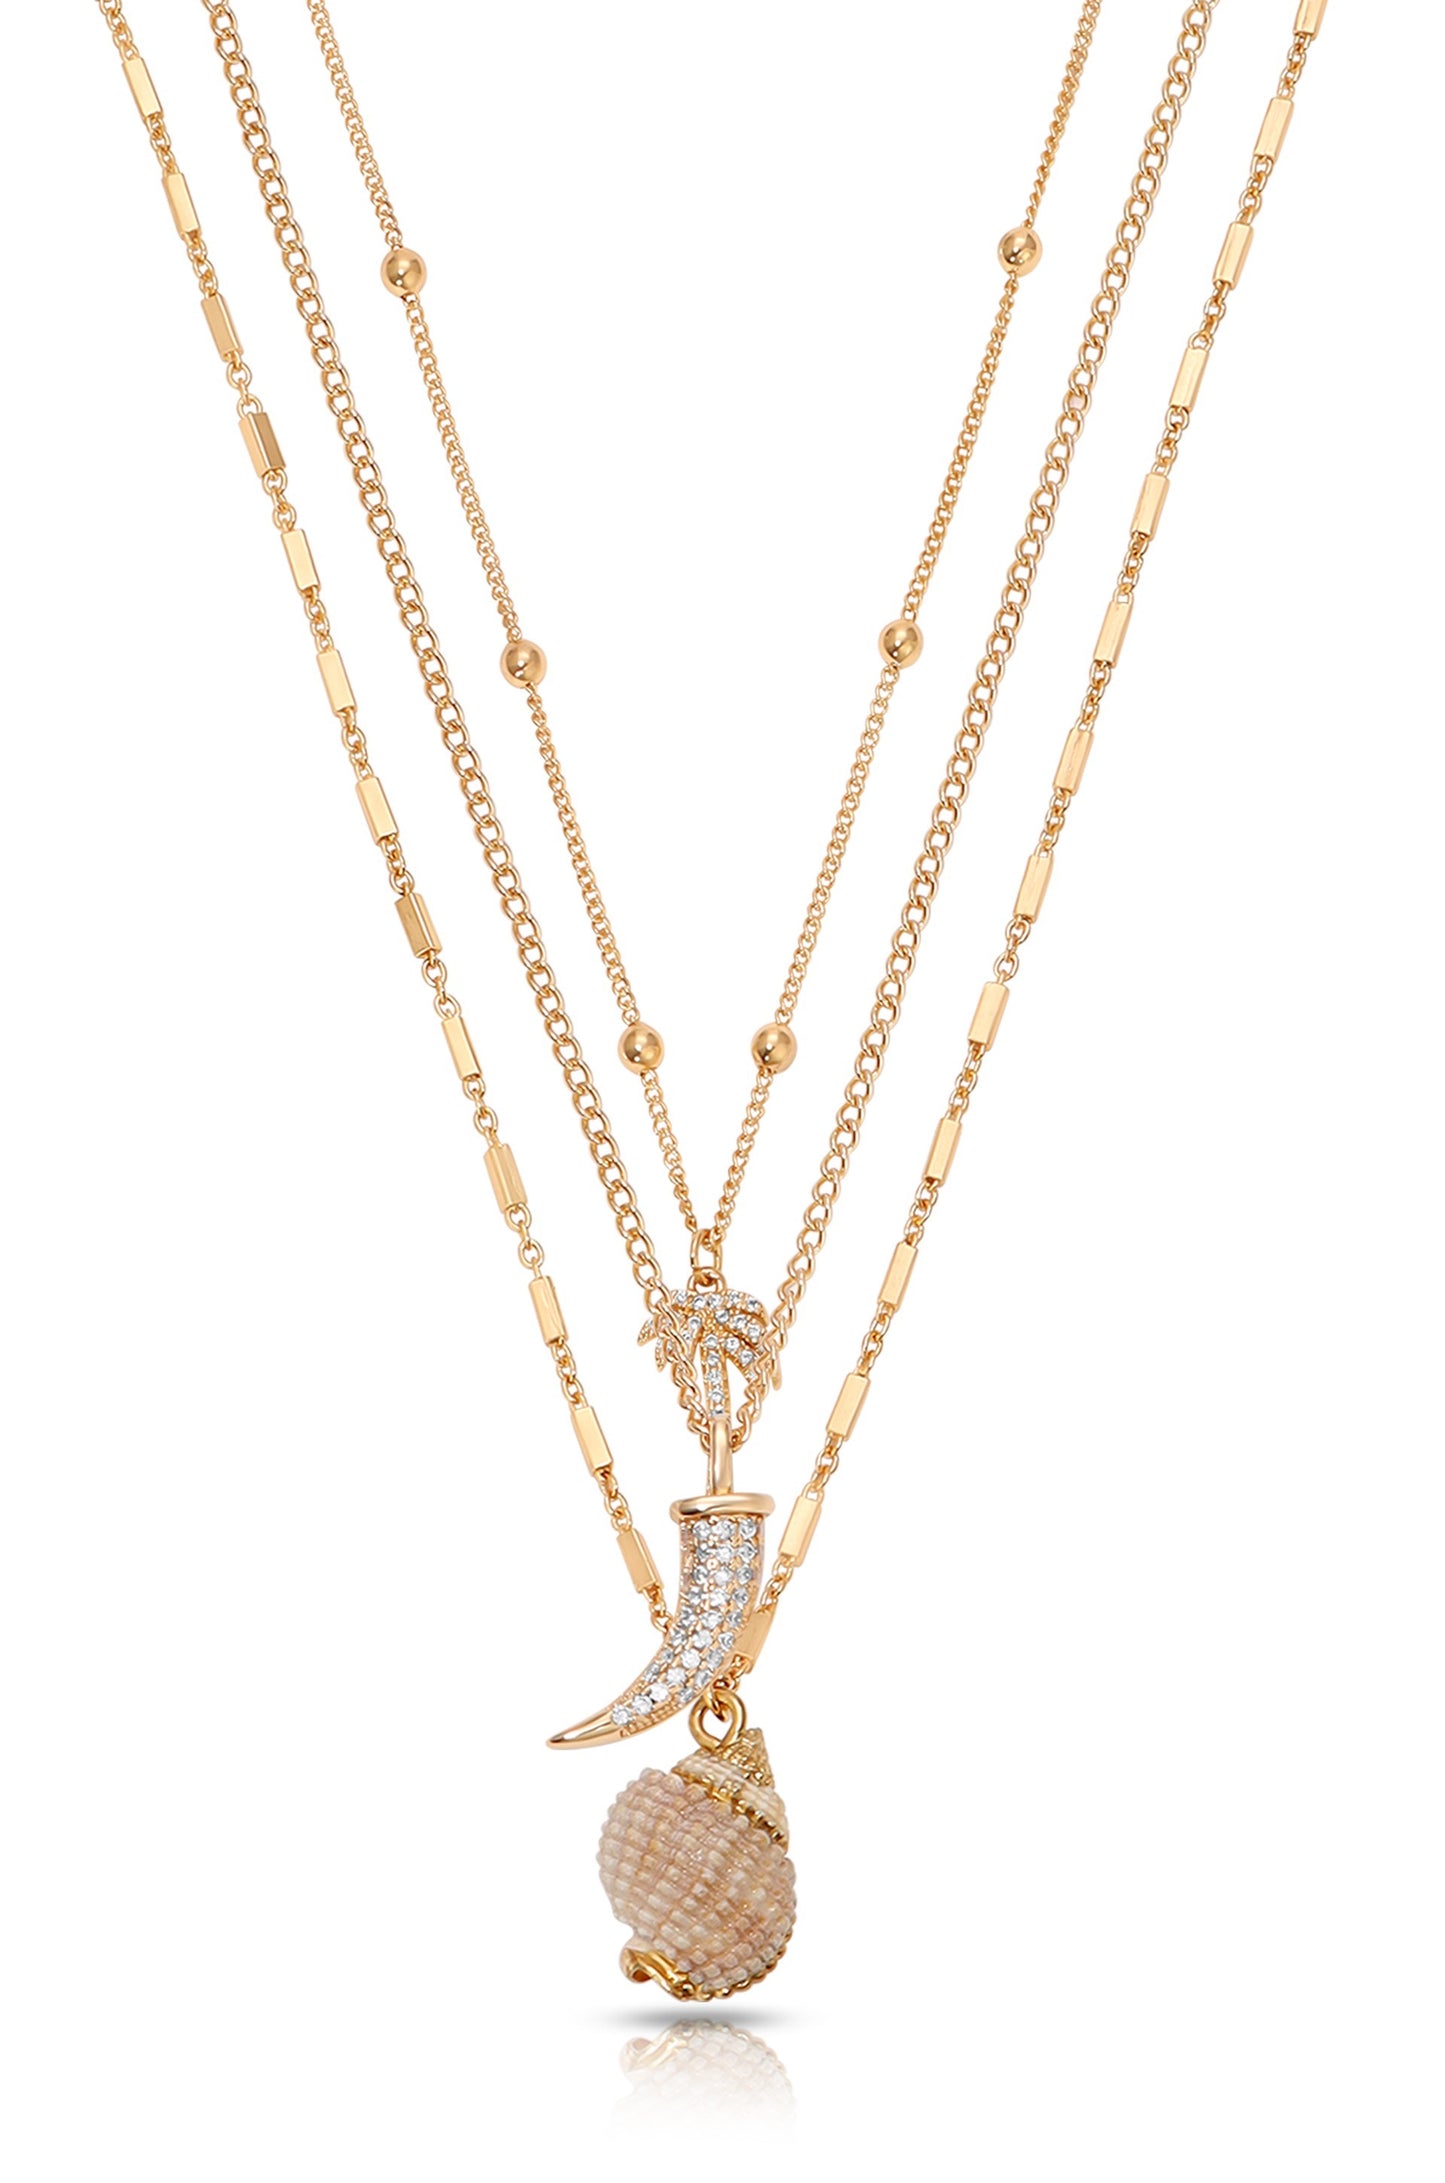 In the Tropics 18k Gold Plated Necklace Set